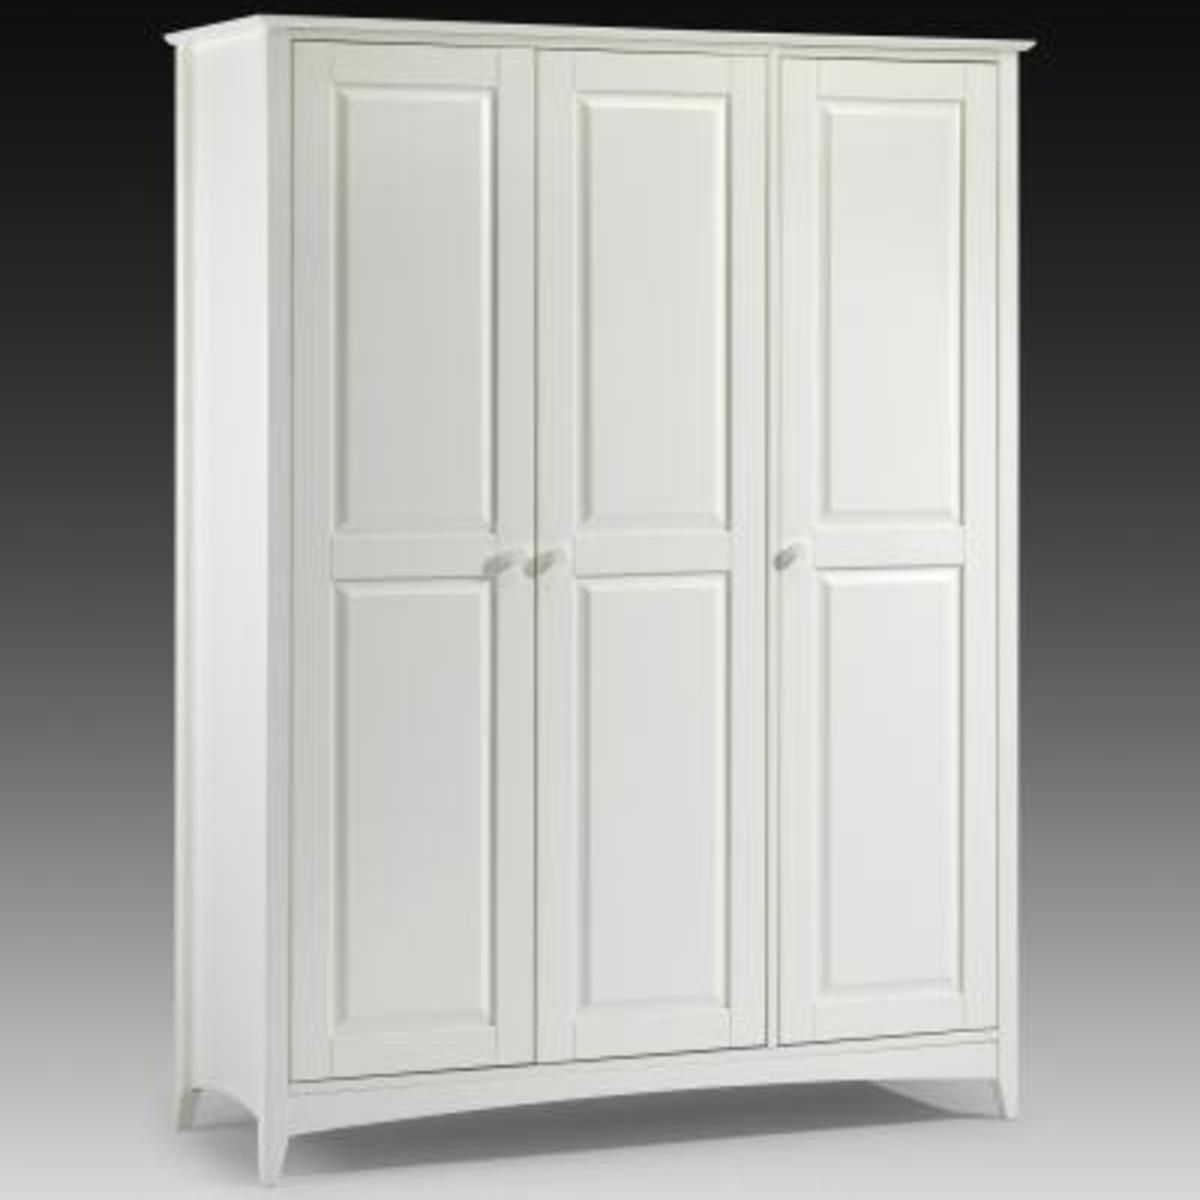 Affordable Wardrobe In White Lacquer |2 Door Wardrobe | Robinsons Beds Throughout White 3 Door Wardrobes (View 19 of 19)